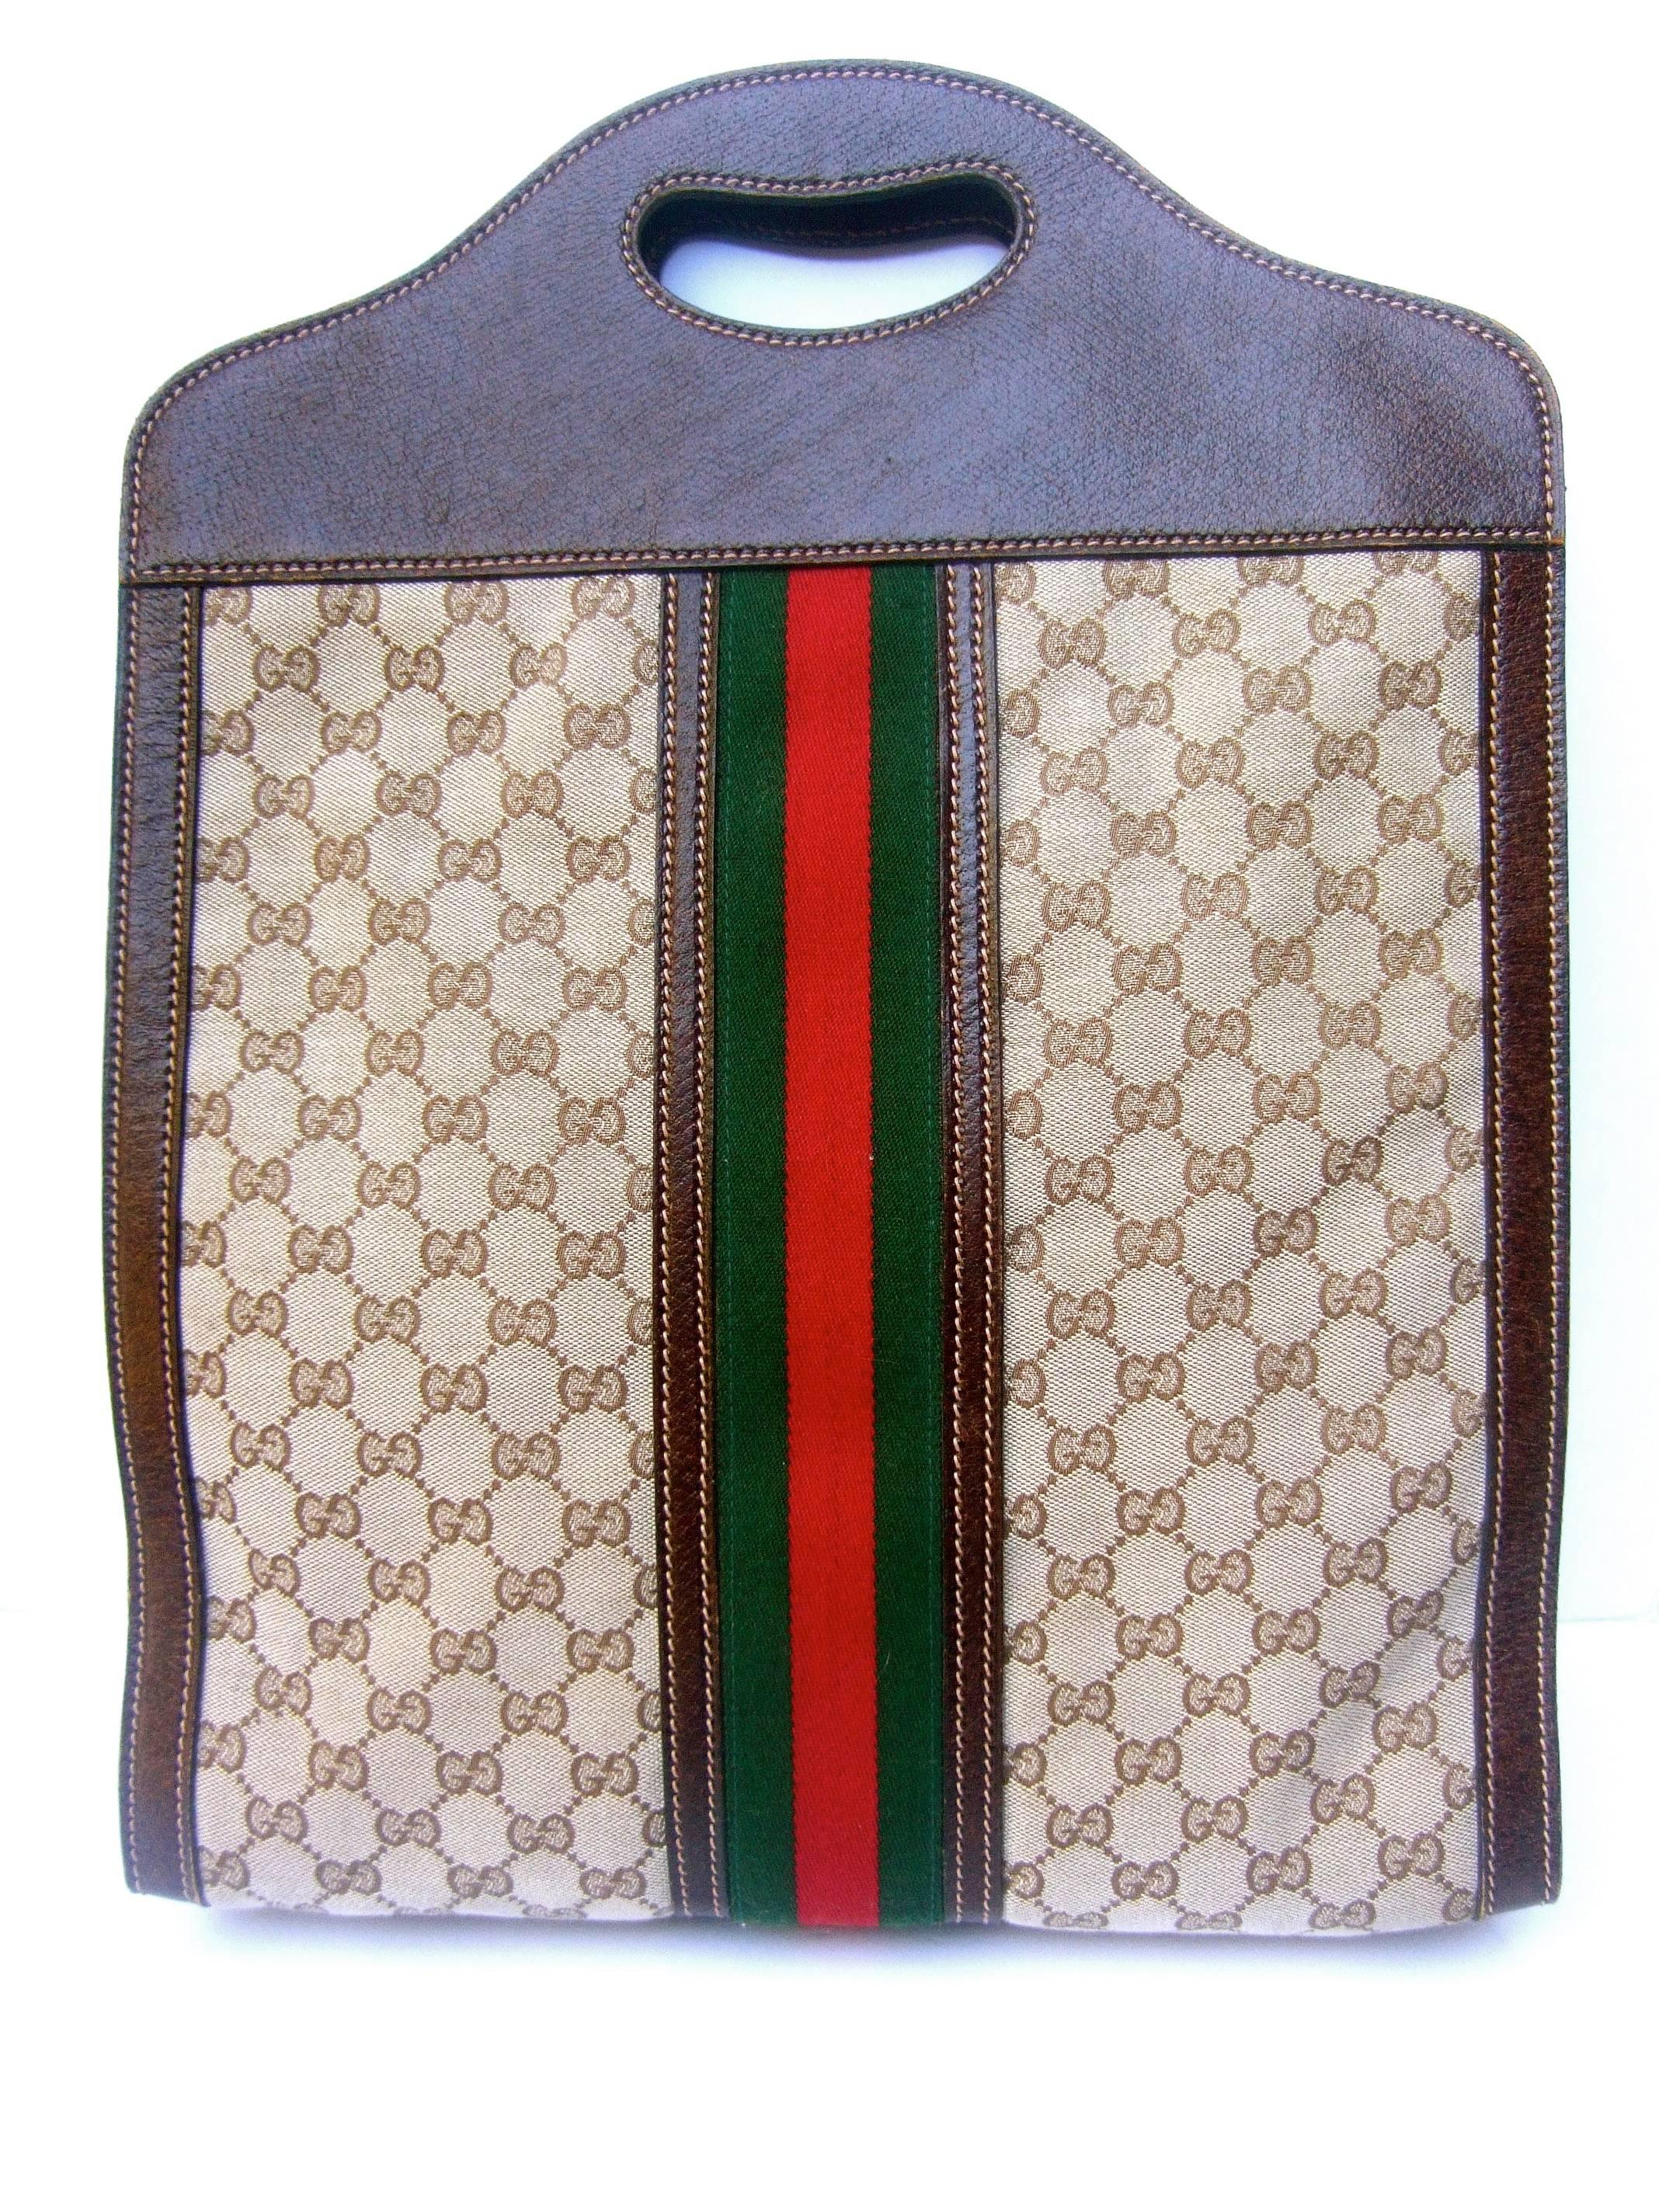 Gucci Italy Brown Leather and canvas large tote bag ca 1970s
The stylish Italian tote bag is framed with brown leather 
with saddle stitching detail

Running down the center is Gucci's signature wide 
red and green webbed stripe. The front and back